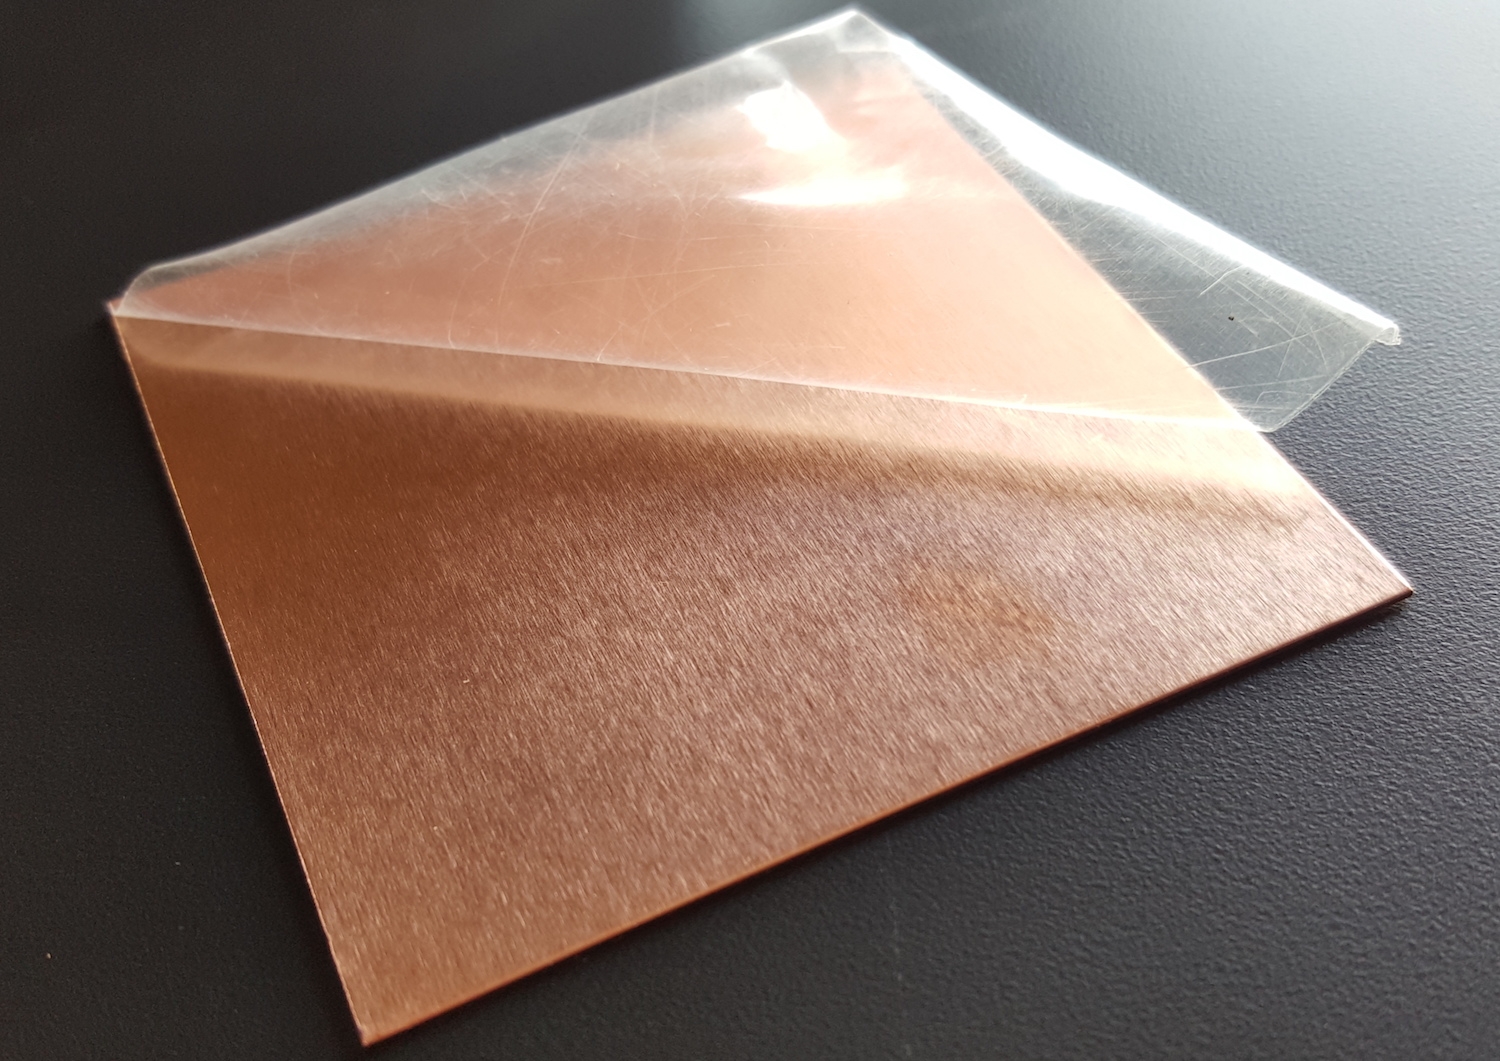 Copper Plate Paper Market Size, Share, Demand, Trends, Growth and Forecast Analysis